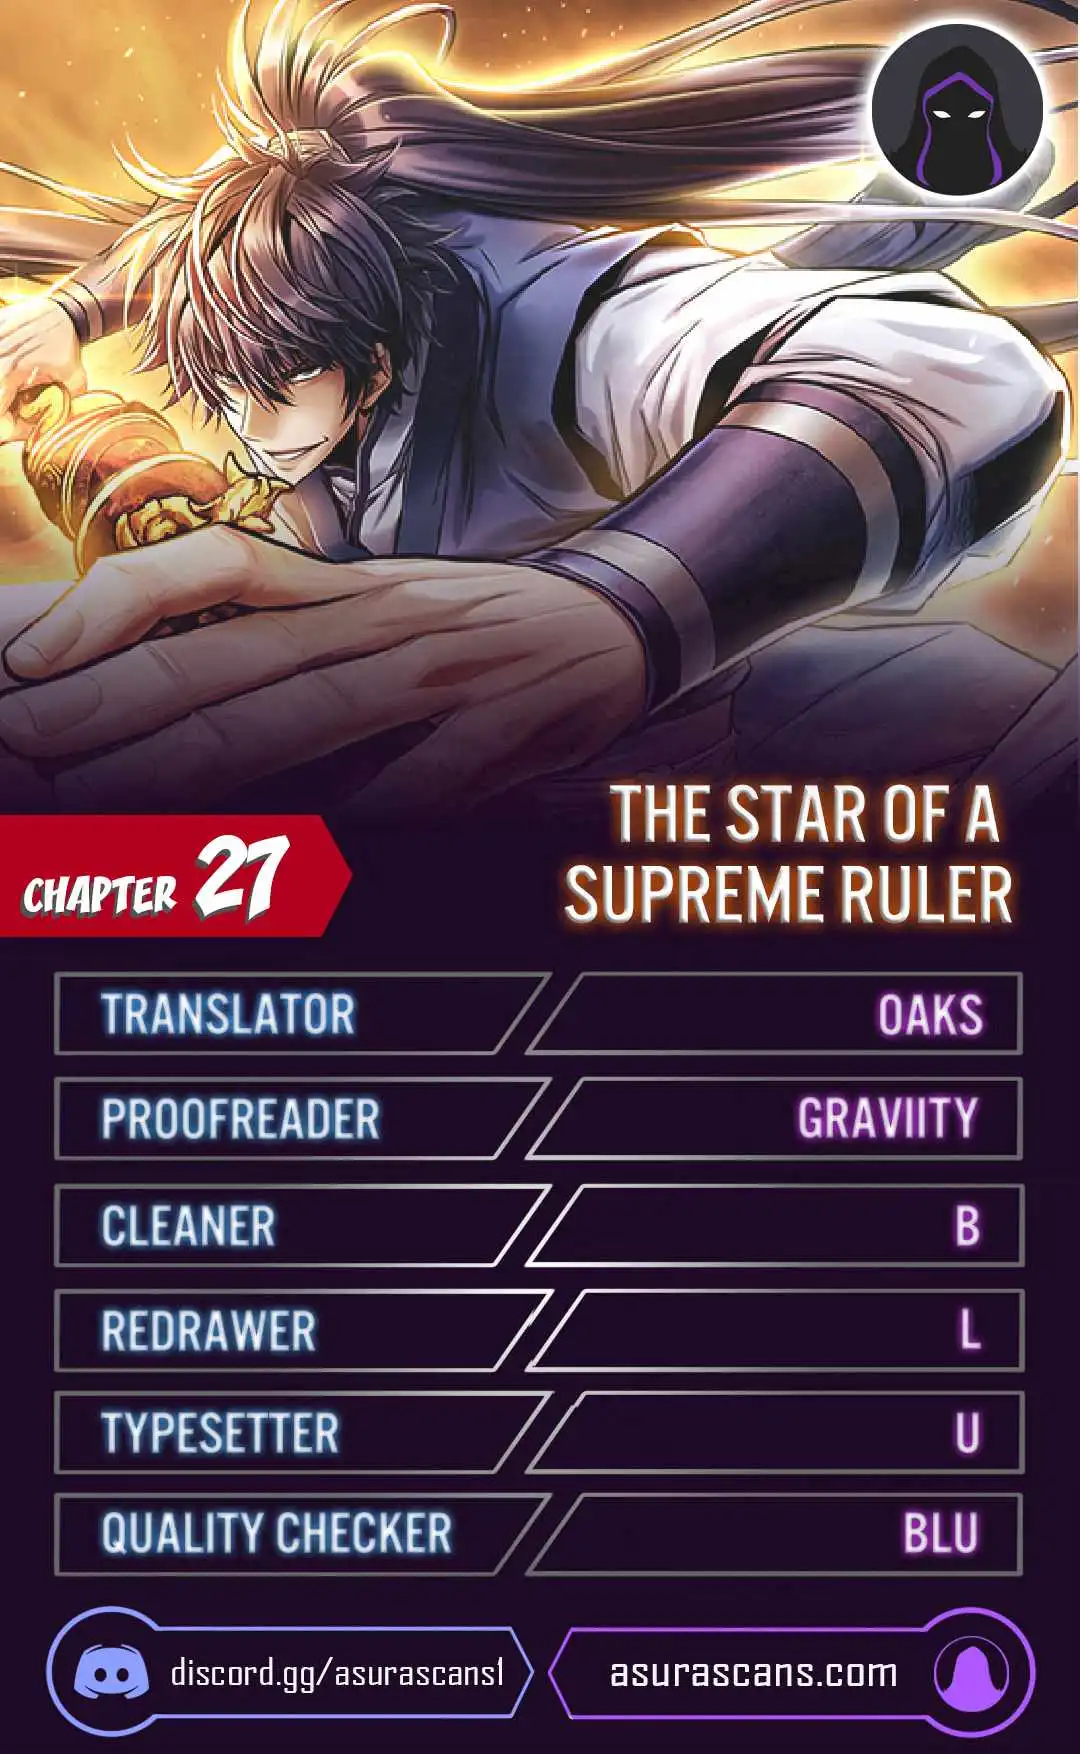 The Star of a Supreme Ruler Chapter 27